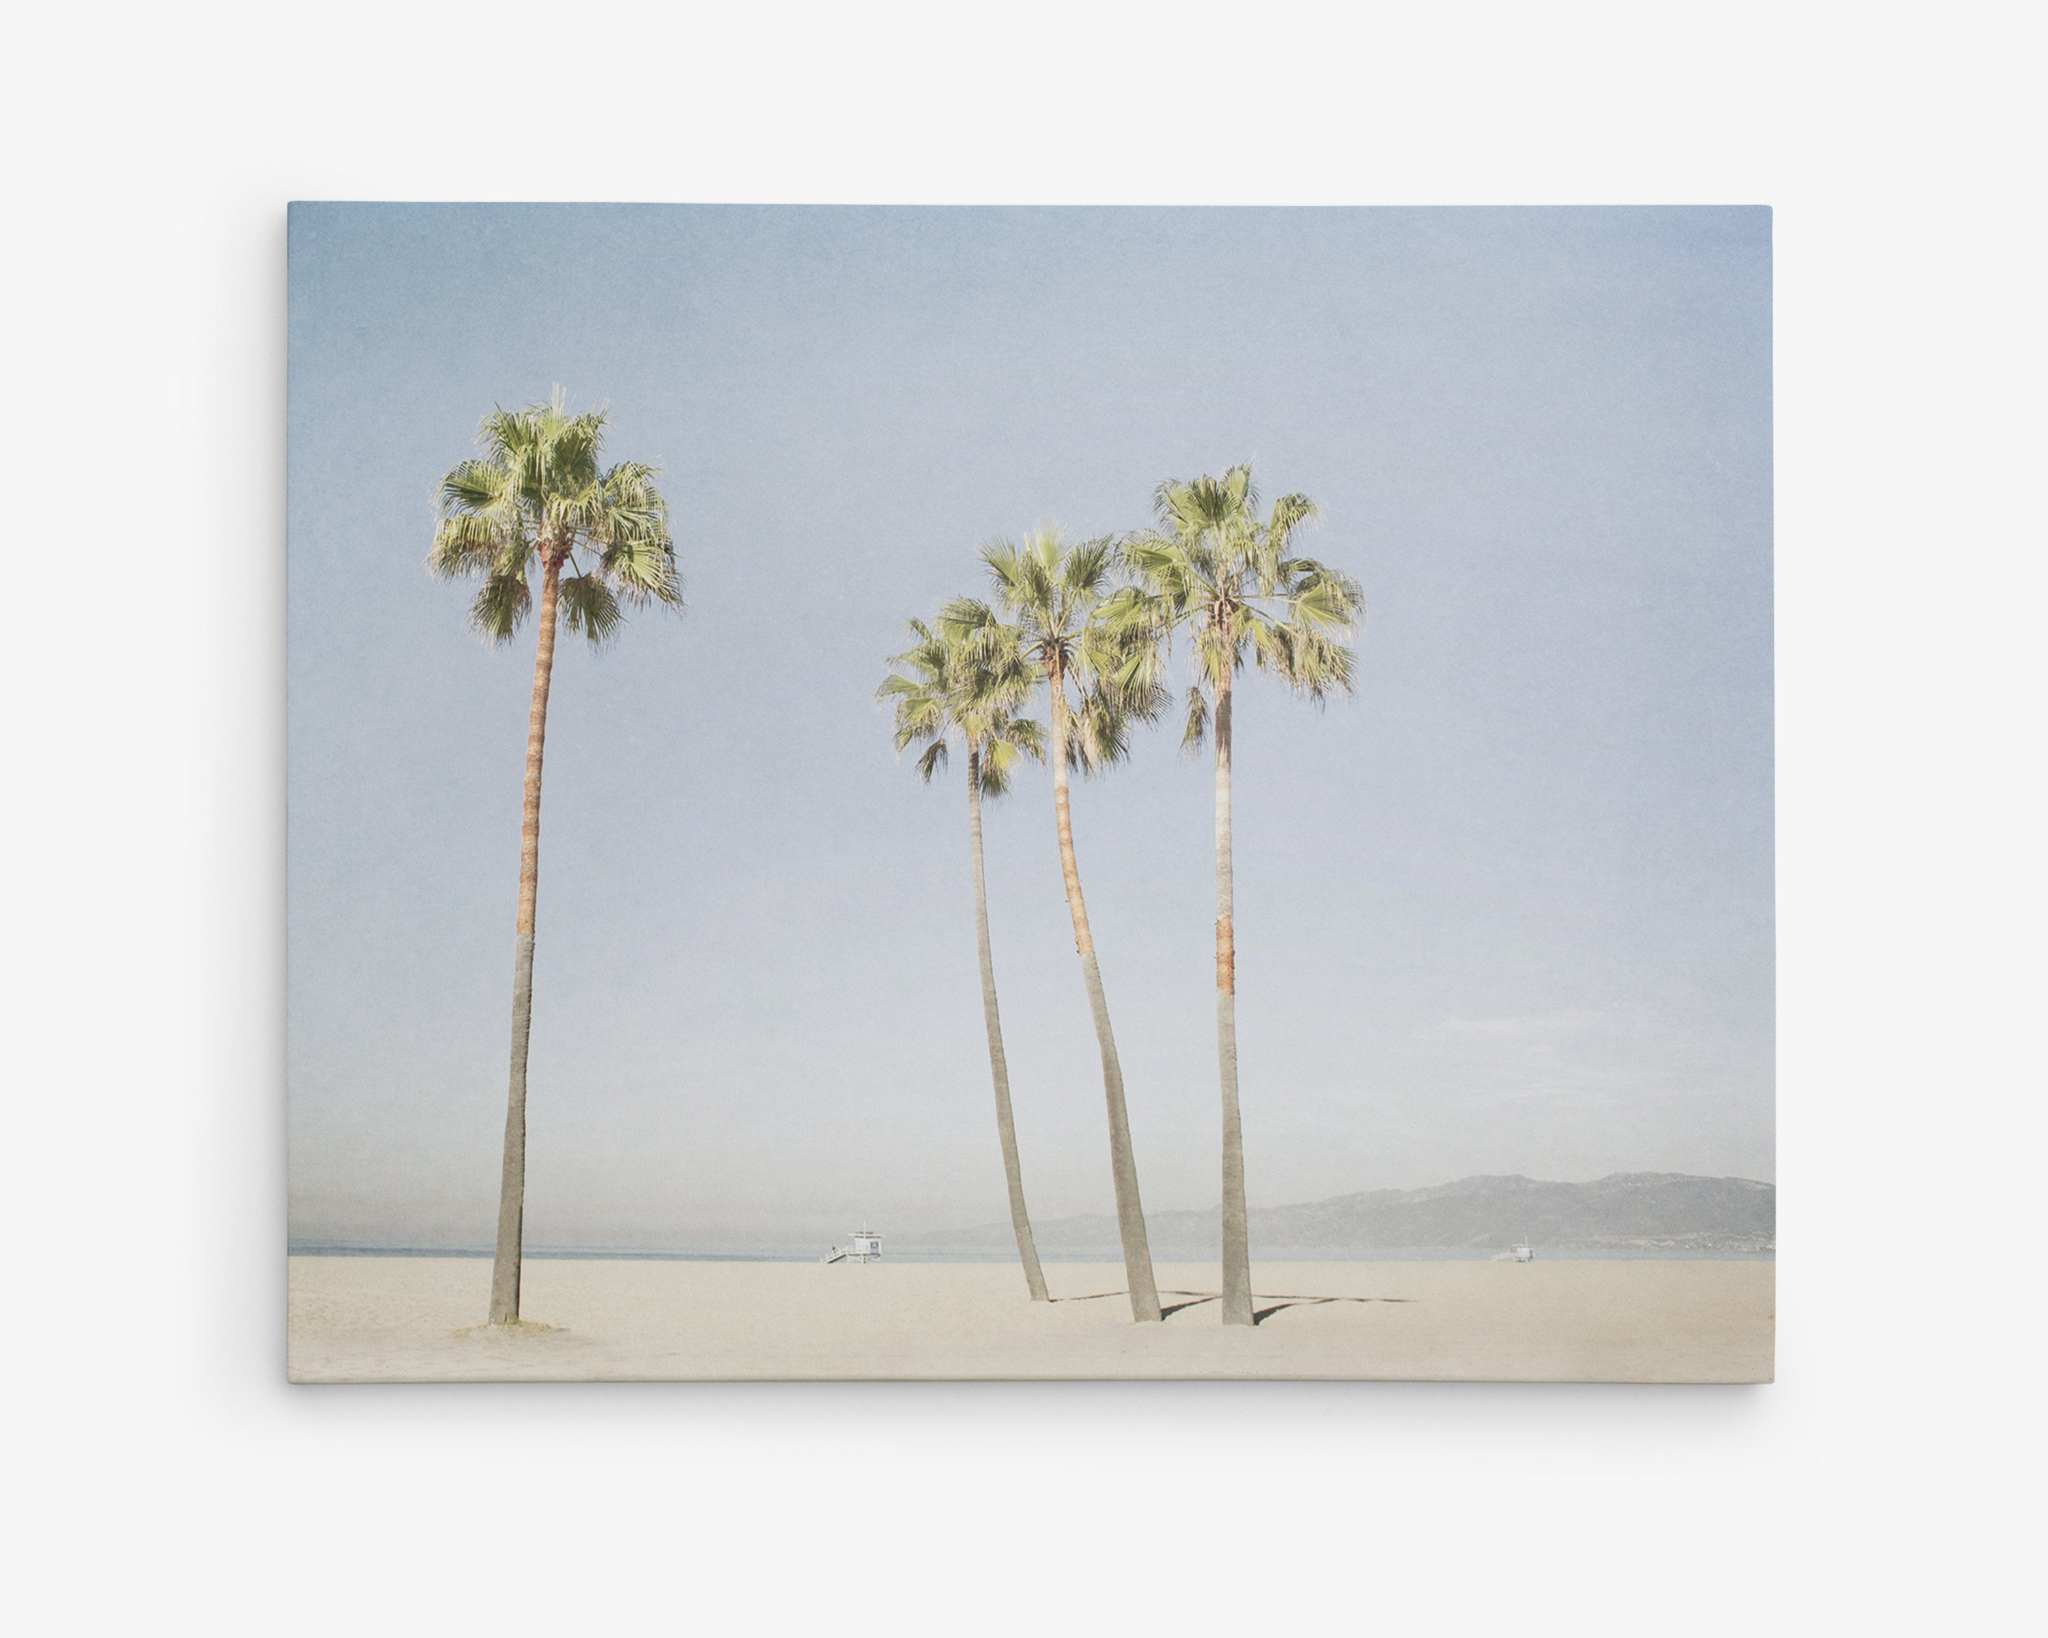 A serene beach with golden sand and five tall palm trees standing in a line, reminiscent of Venice Beach. The sky is clear and blue, with distant mountains visible on the horizon. Two small boats can be seen on the calm water in the background, captured beautifully on Offley Green&#39;s California Venice Beach Canvas Wall Art, &#39;Boardwalk Palms&#39;.